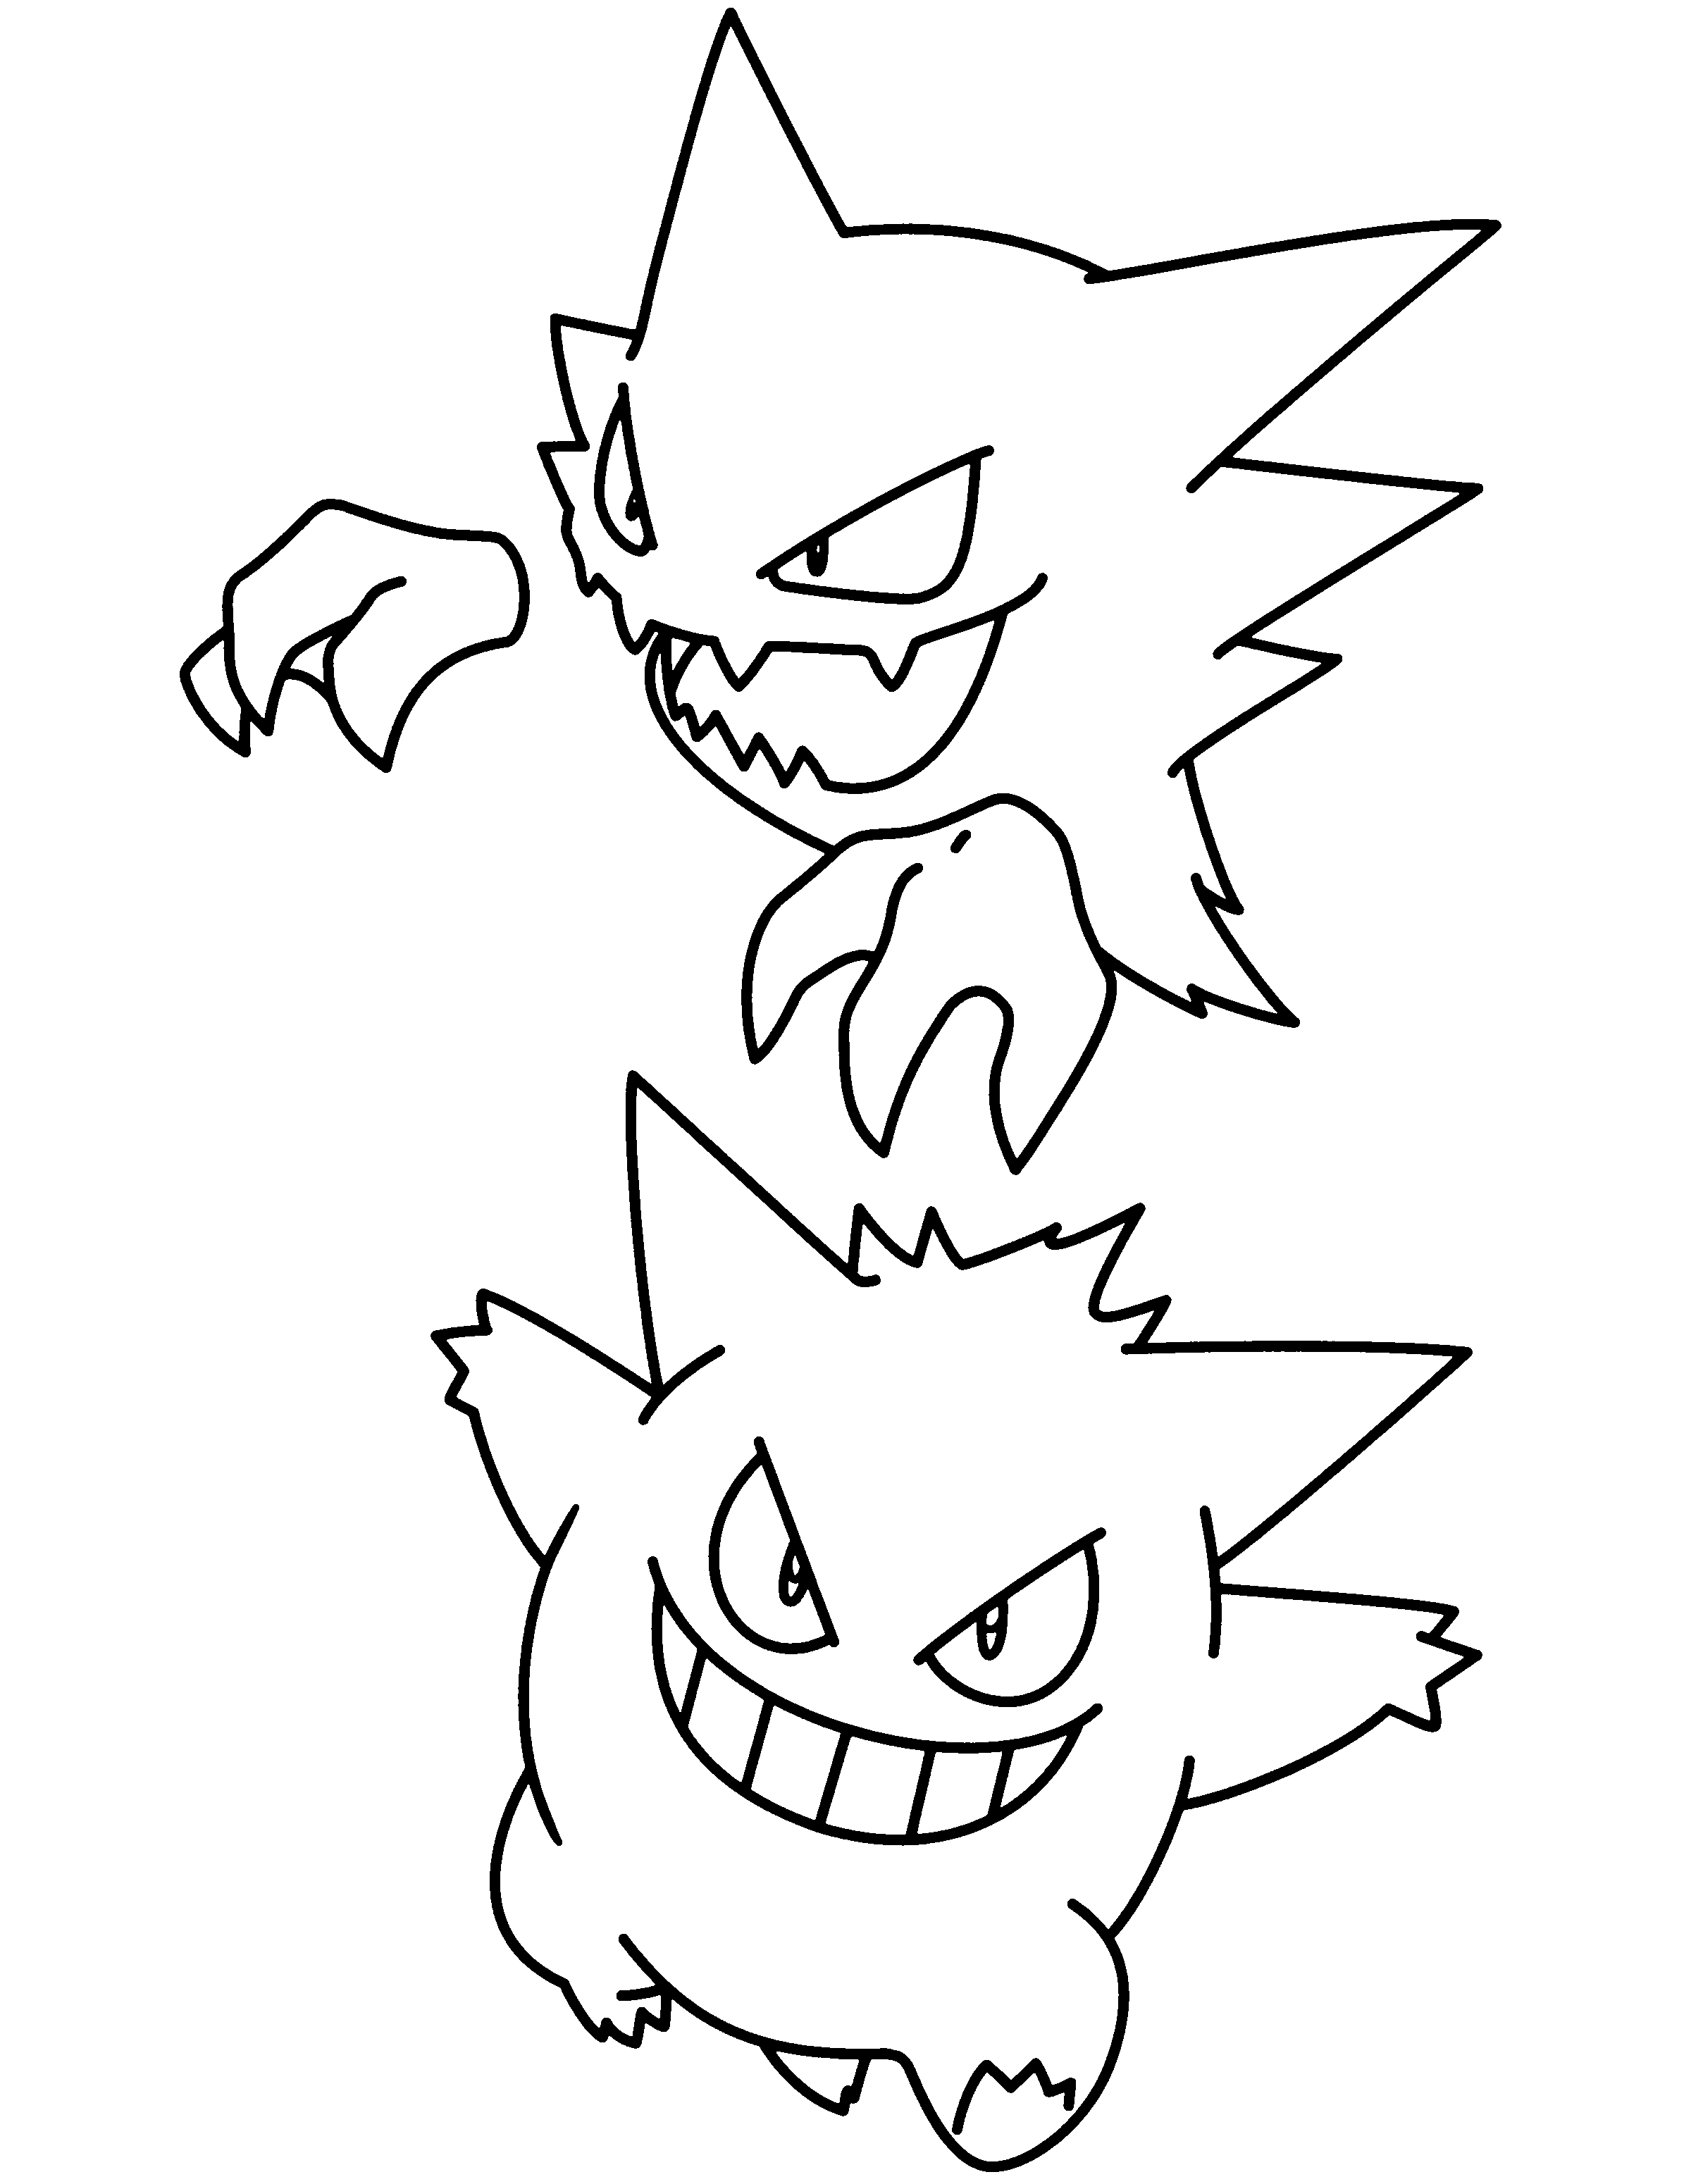 Haunter and Gengar Pokemon coloring pages, Pokemon coloring.